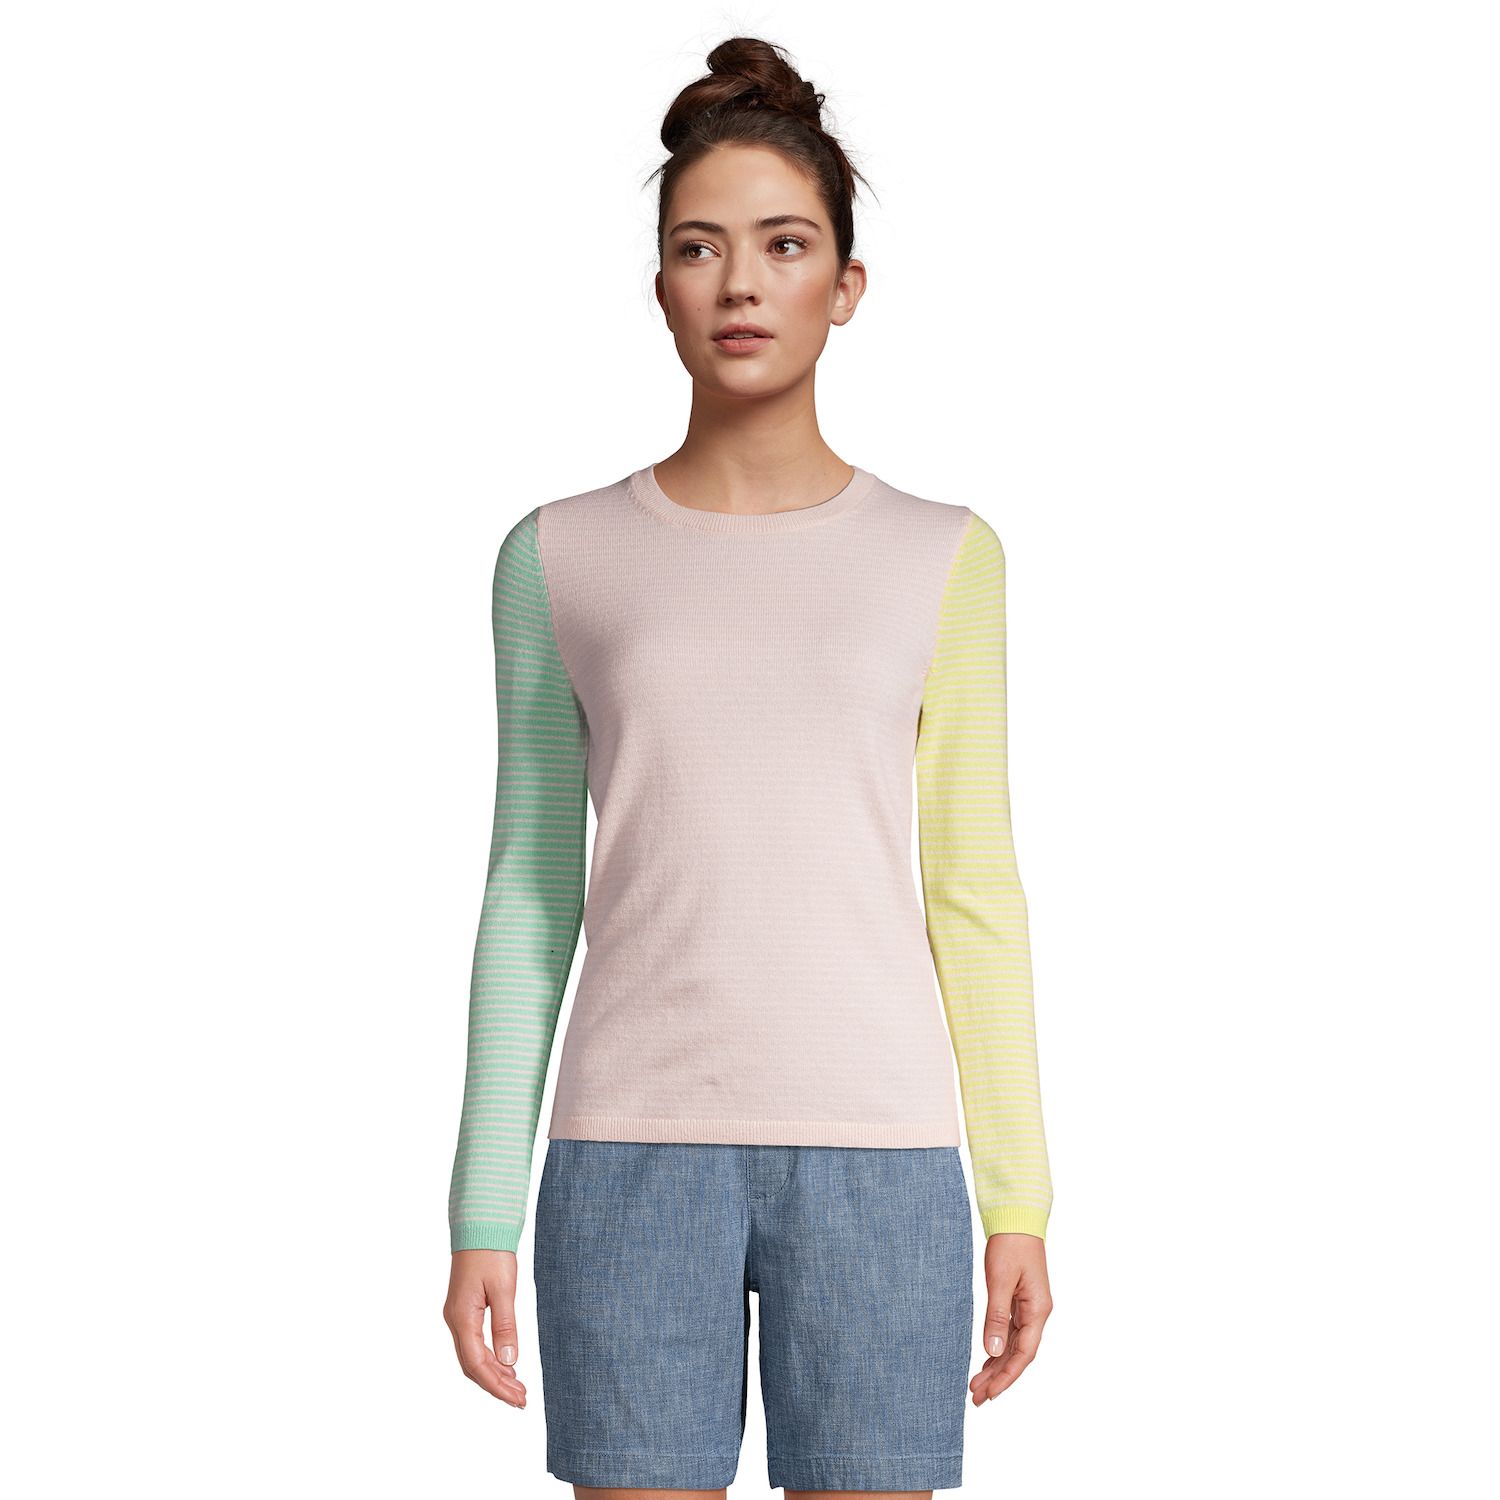 Image for Lands' End Women's Print Crewneck Cashmere Sweater at Kohl's.